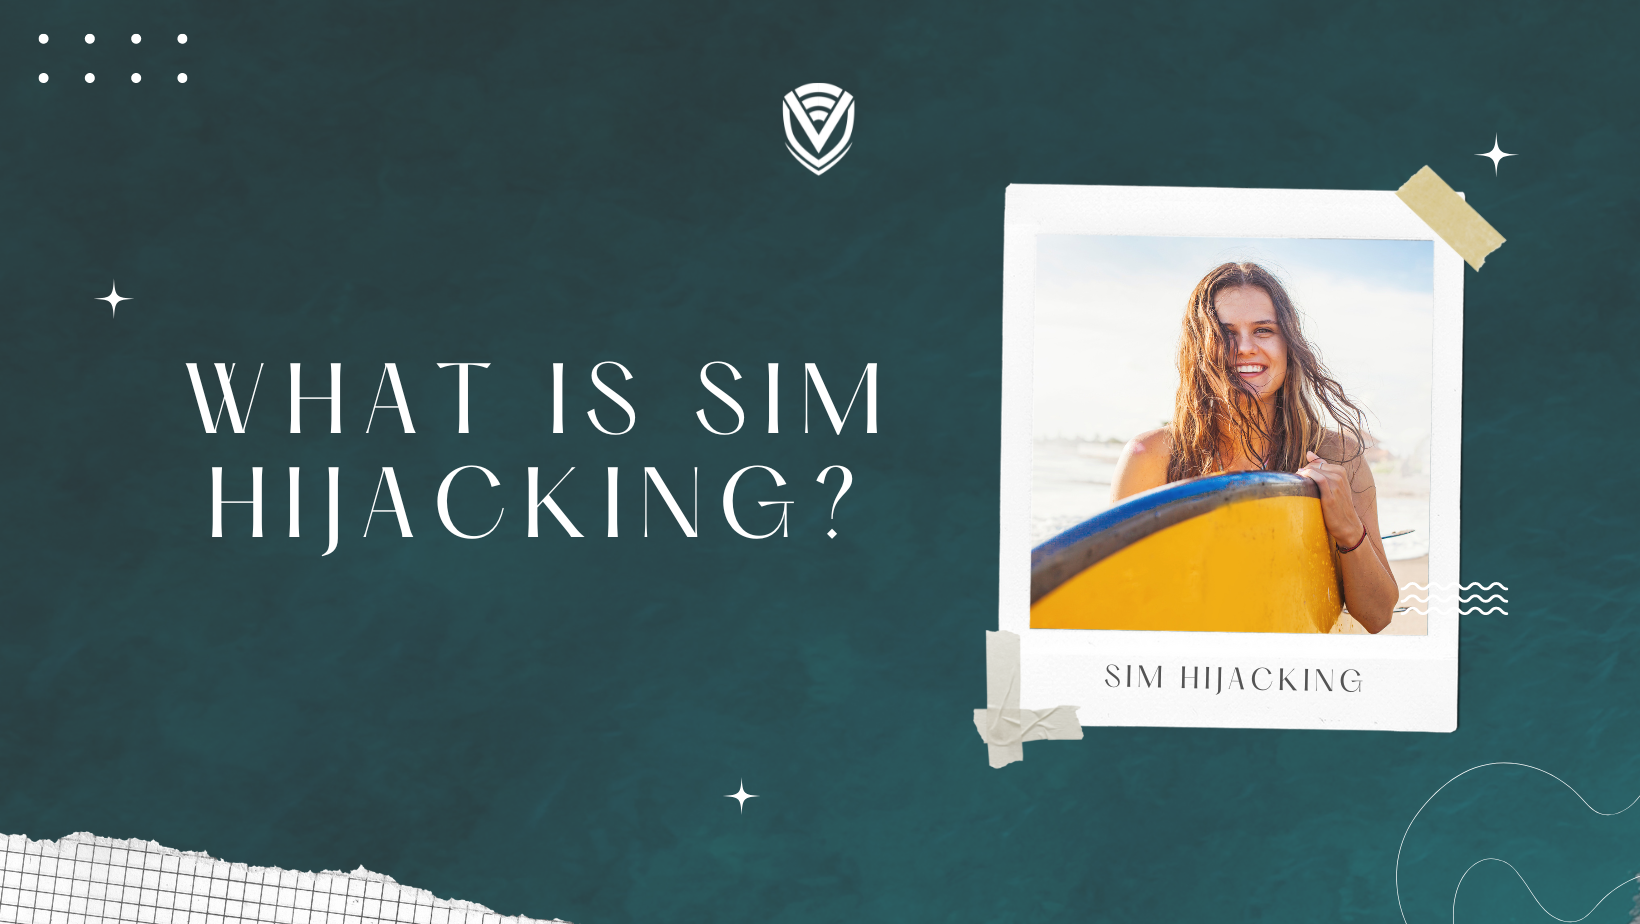 SIM Hijacking: What You Need to Know